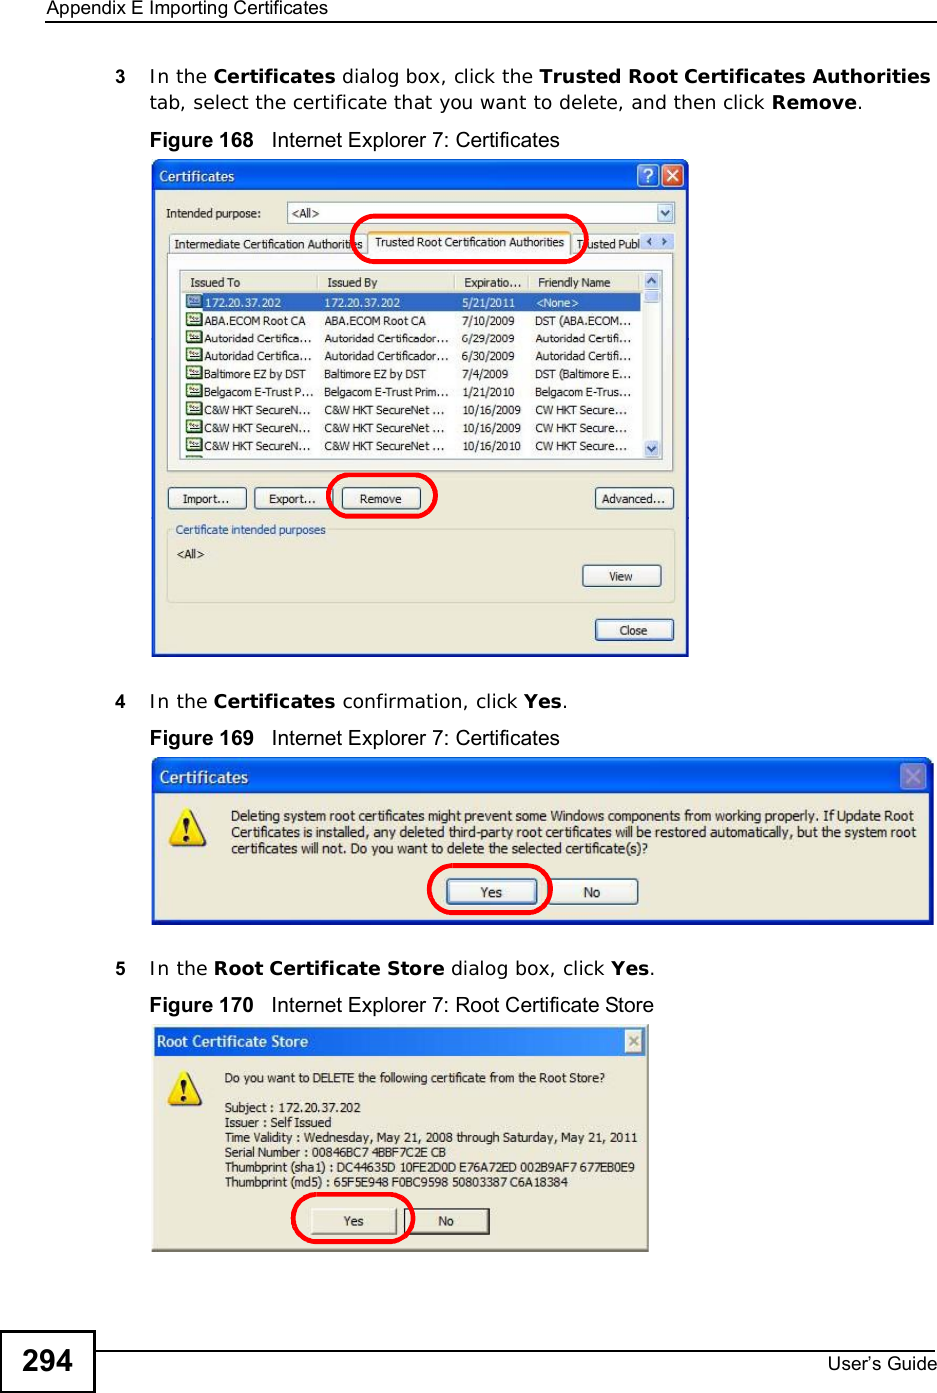 Appendix EImporting CertificatesUser s Guide2943In the Certificates dialog box, click the Trusted Root Certificates Authoritiestab, select the certificate that you want to delete, and then click Remove.Figure 168   Internet Explorer 7: Certificates4In the Certificates confirmation, click Yes.Figure 169   Internet Explorer 7: Certificates5In the Root Certificate Store dialog box, click Yes.Figure 170   Internet Explorer 7: Root Certificate Store